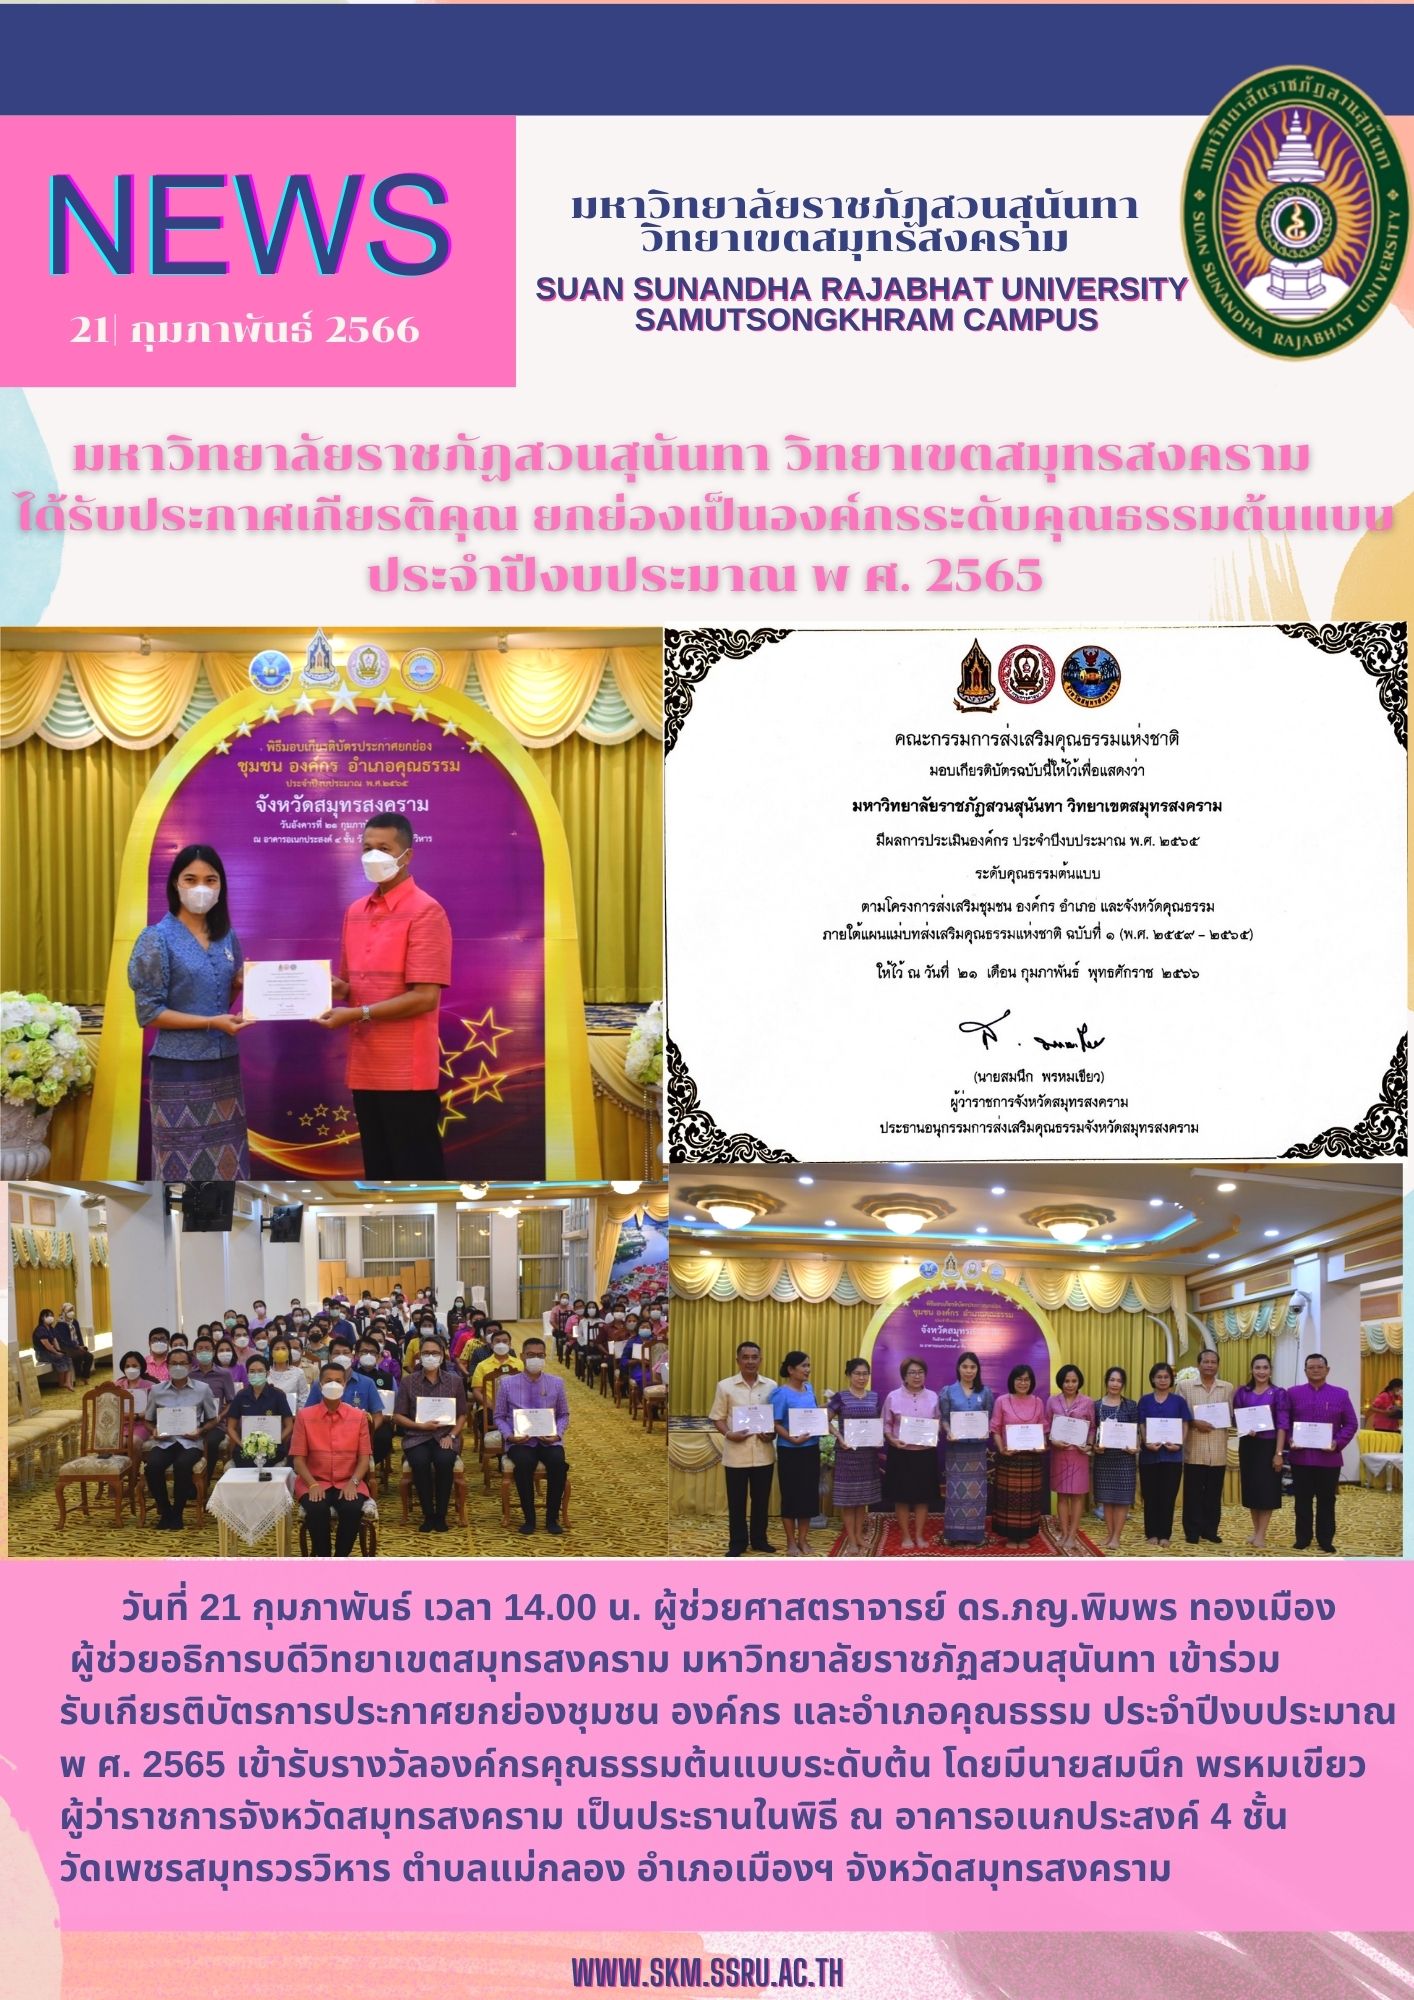 Assistant Professor Dr. Pimporn Thongmuang, Assistant to the President for Samut Songkhram Campus Suan Sunandha Rajabhat University Participated in receiving a certificate honoring the community, organization and moral district. Fiscal Year 2022